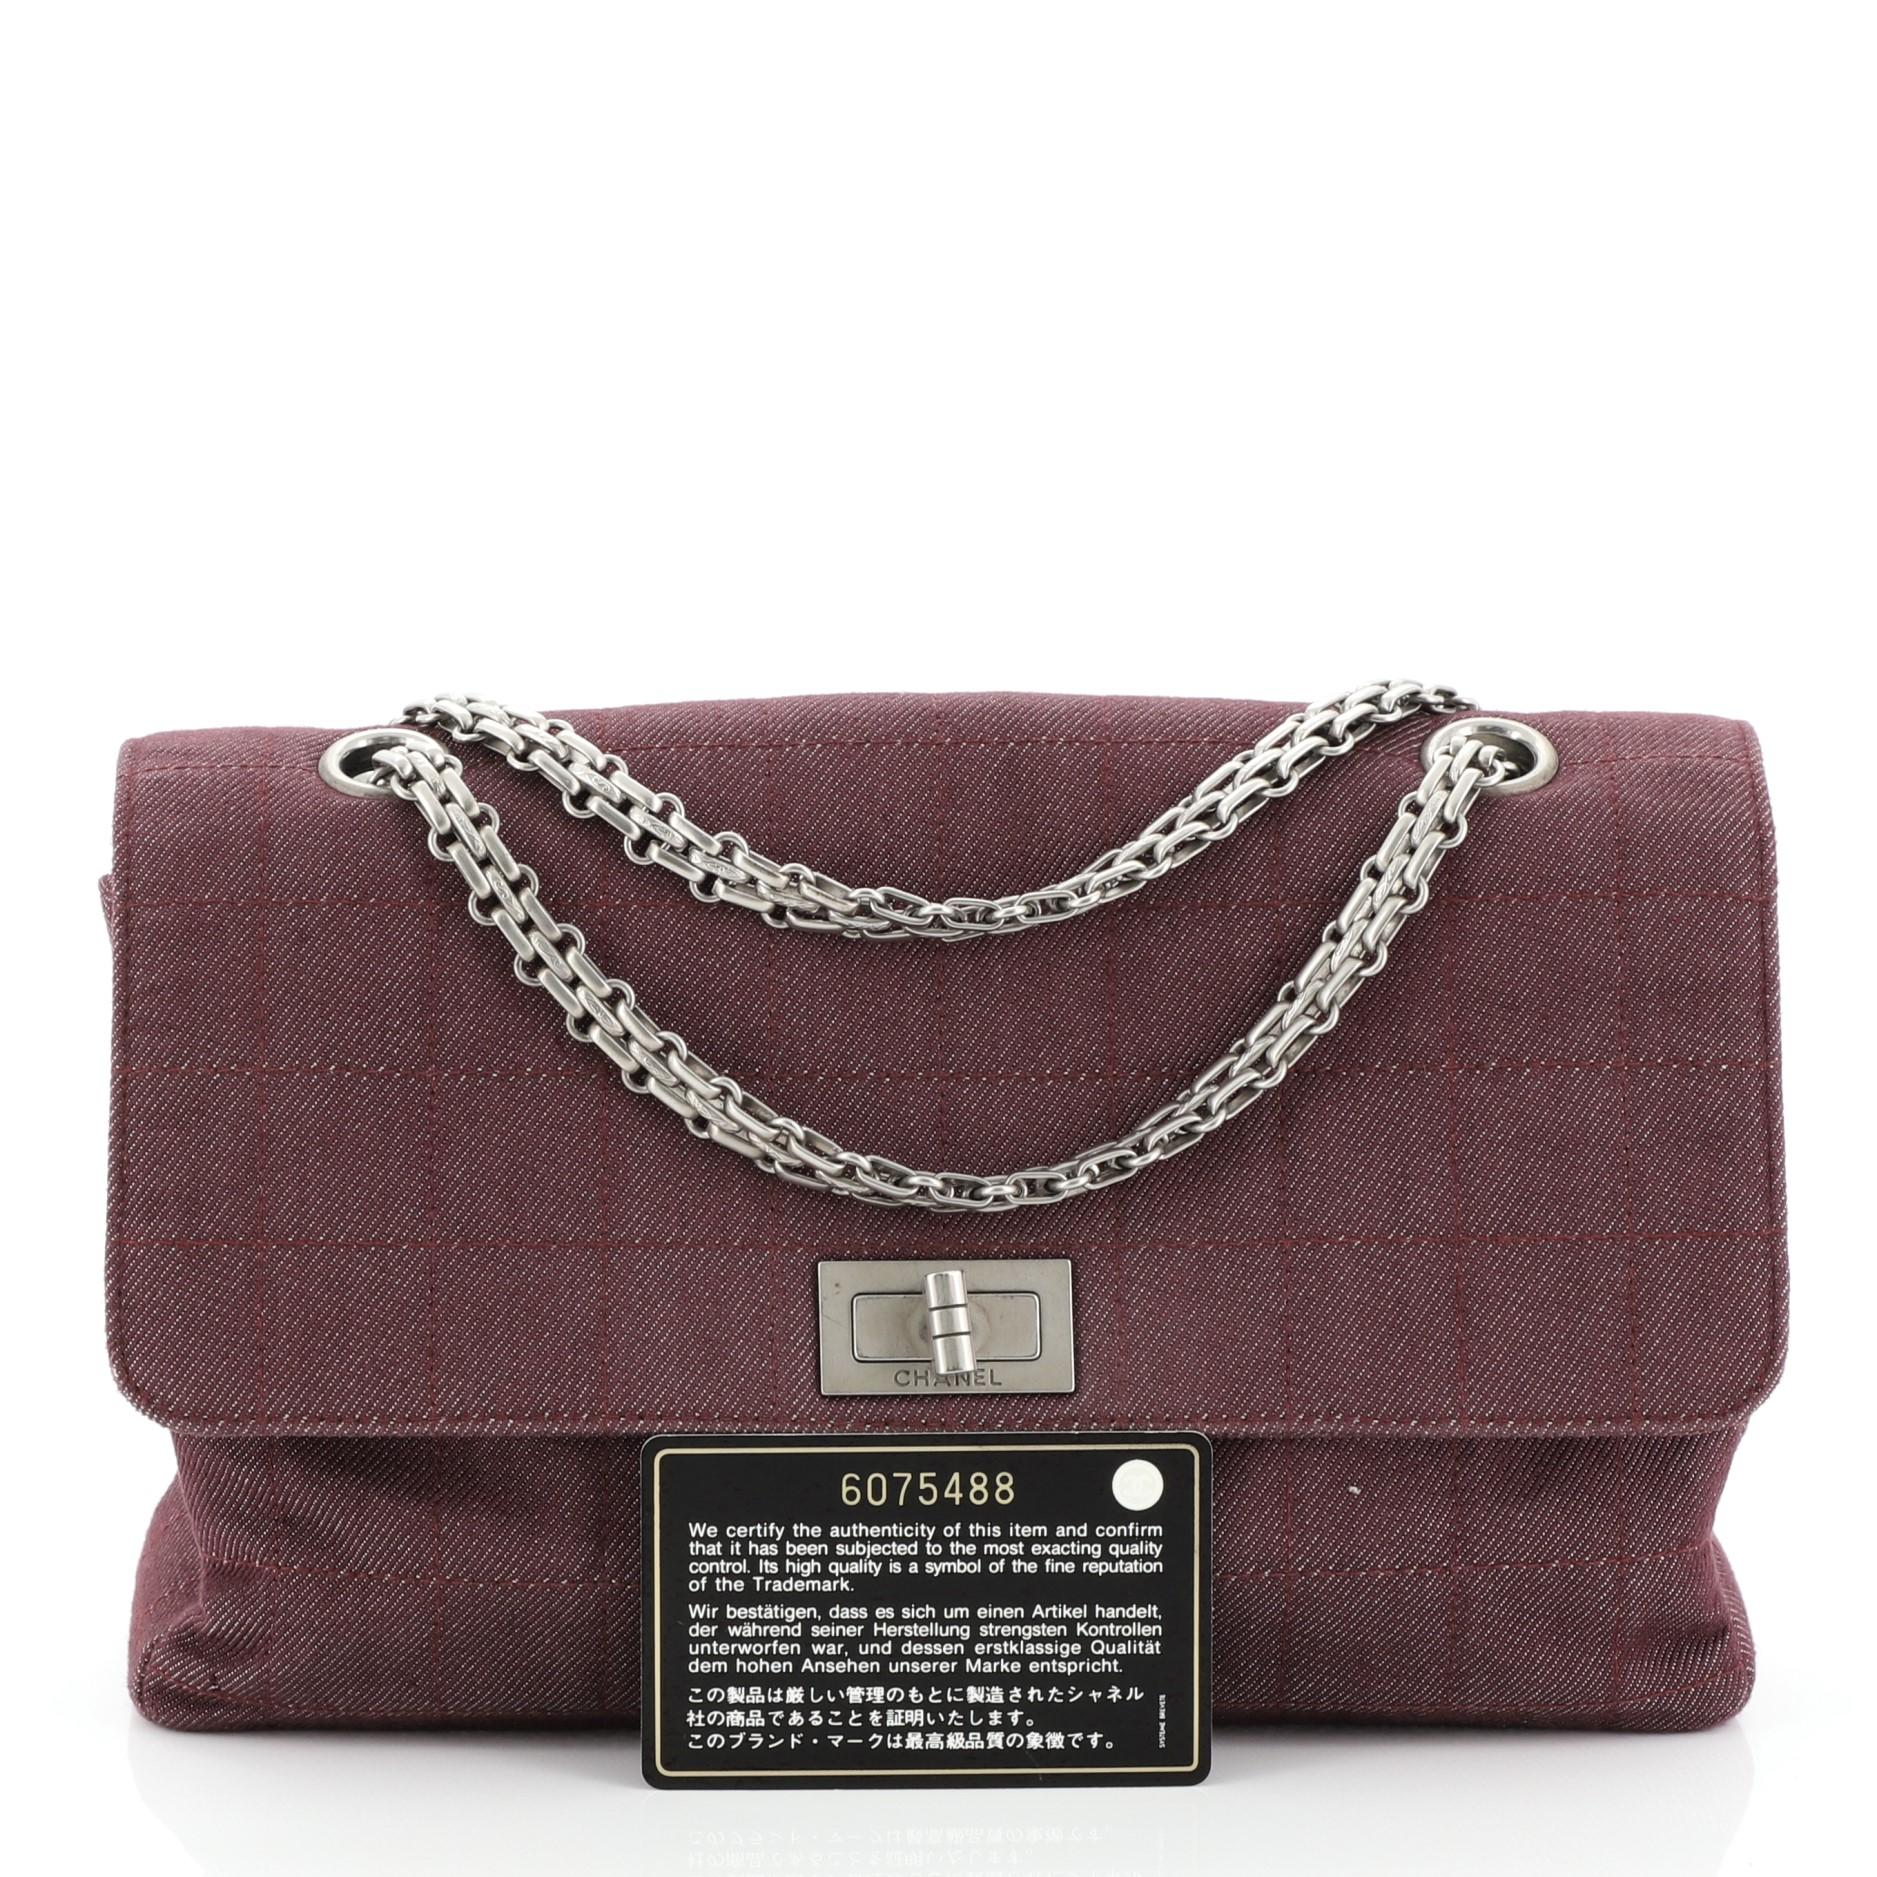 This Chanel Chocolate Bar Reissue Flap Bag Quilted Denim, crafted from red quilted denim, features reissue chain link strap and matte silver-tone hardware. Its mademoiselle turn-lock closure opens to a red fabric interior. Hologram sticker reads: